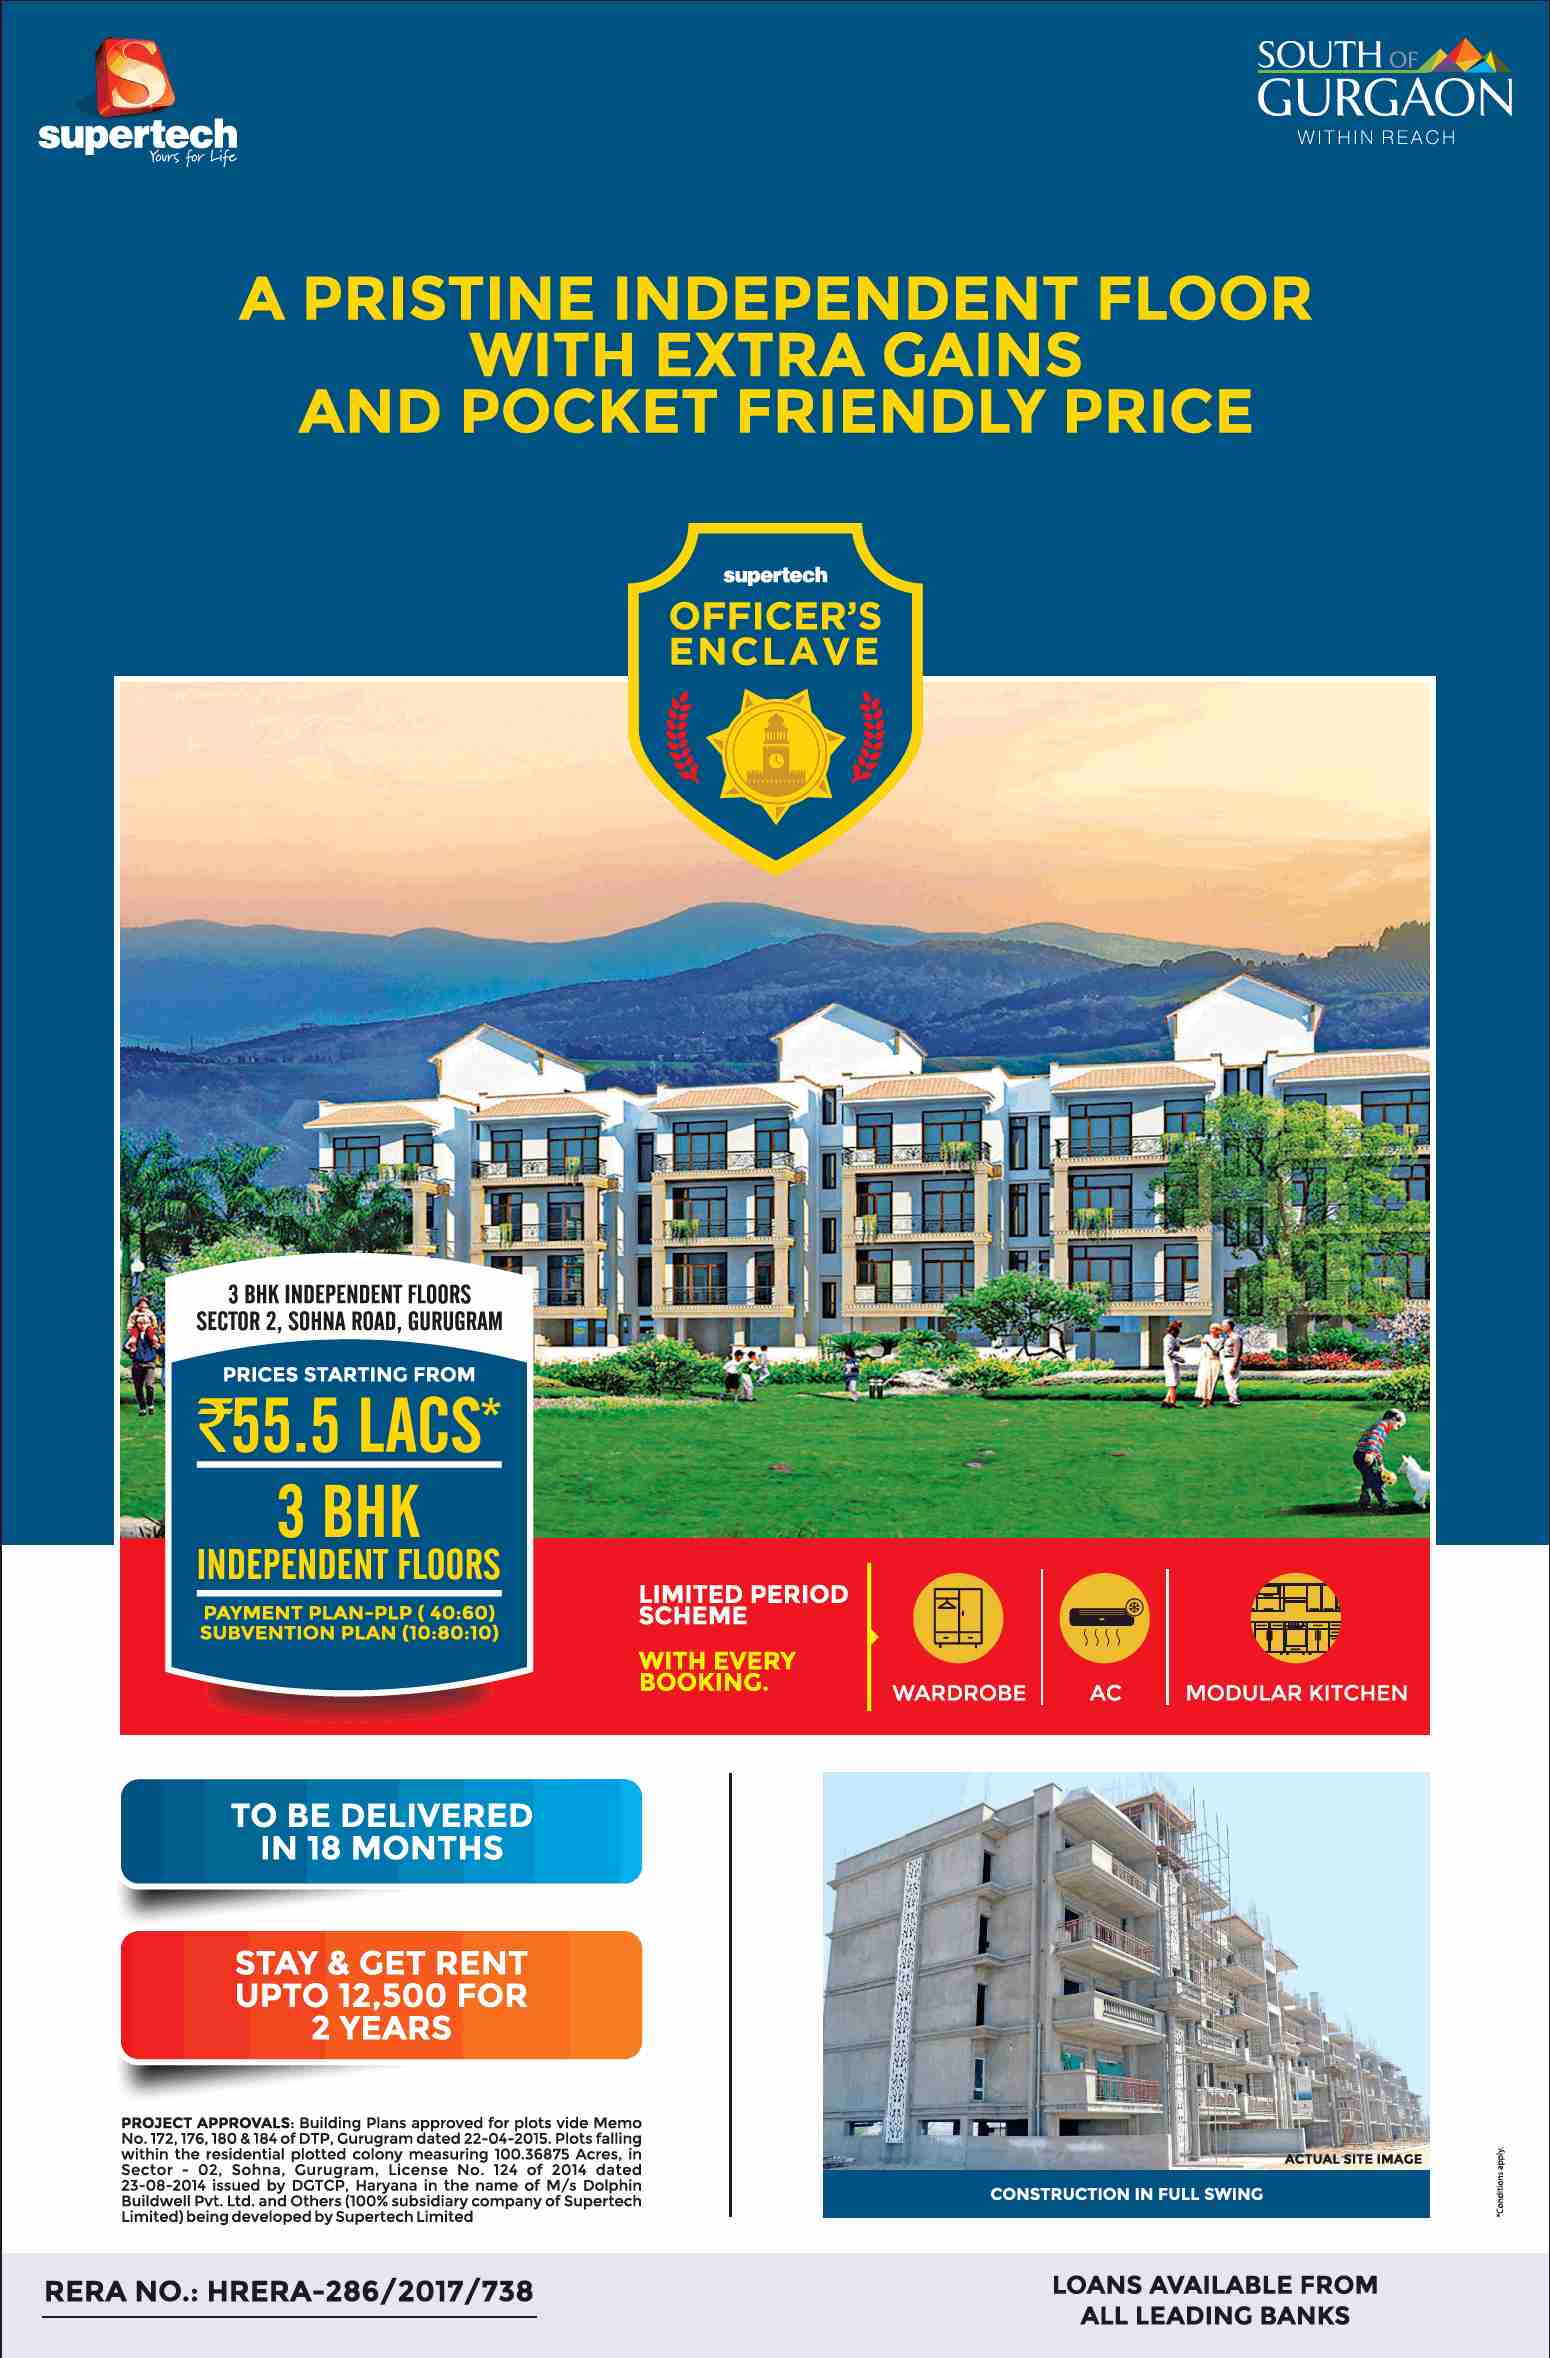 Get 3 BHK Independent floors in Rs 55 Lacs* at Supertech Officers Enclave, Gurgaon